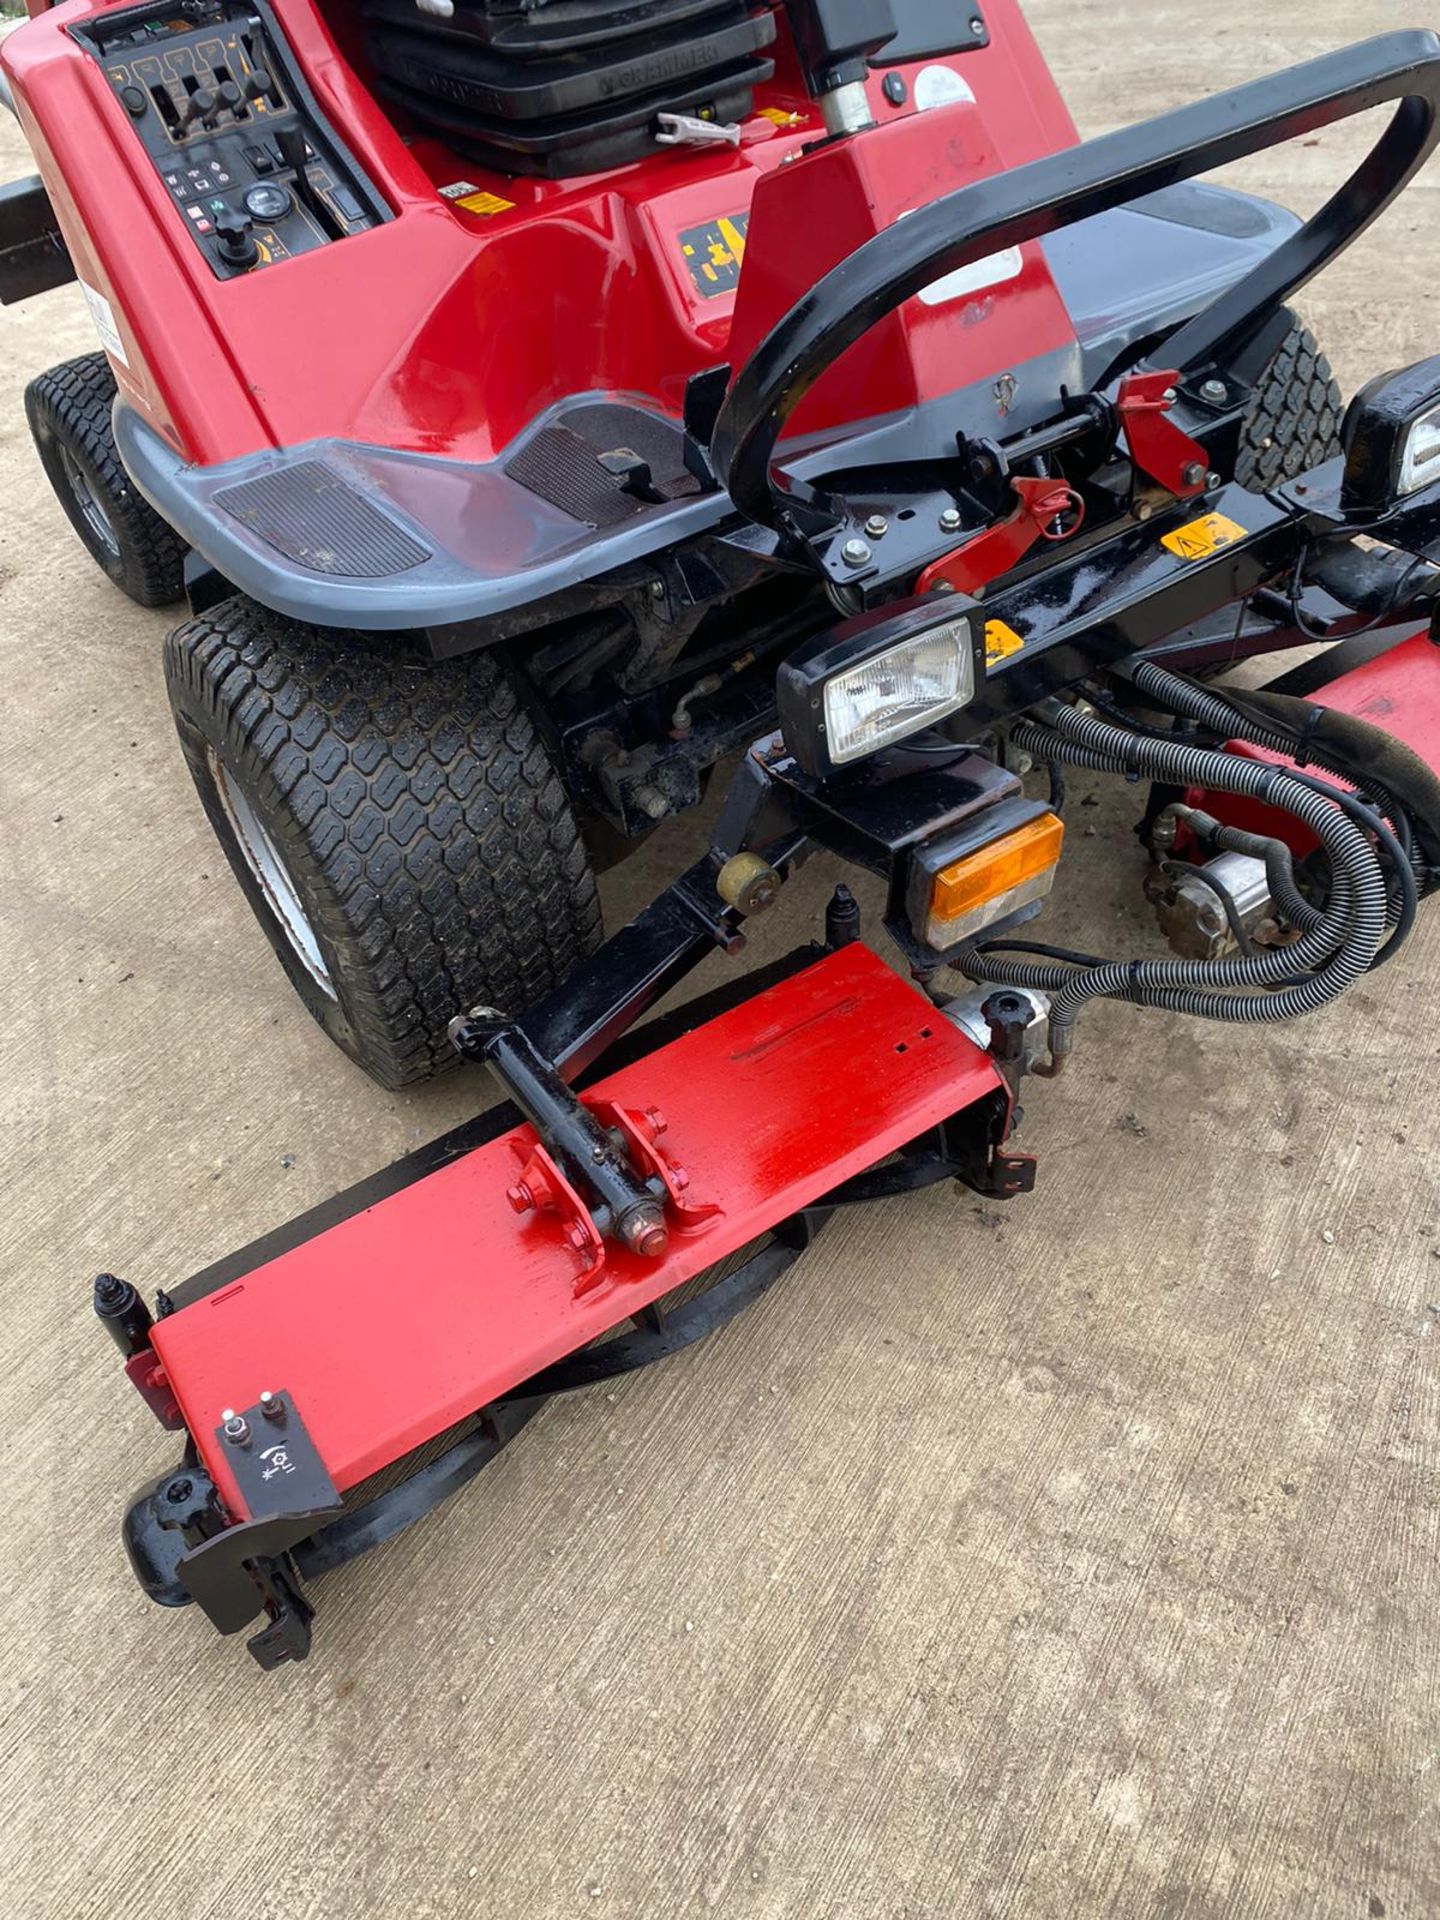 TORO LT3240 RIDE ON LAWN MOWER, 2012 ROAD REGISTERED, 4 WHEEL DRIVE, VERY CLEAN CONDITION *PLUS VAT* - Image 2 of 6